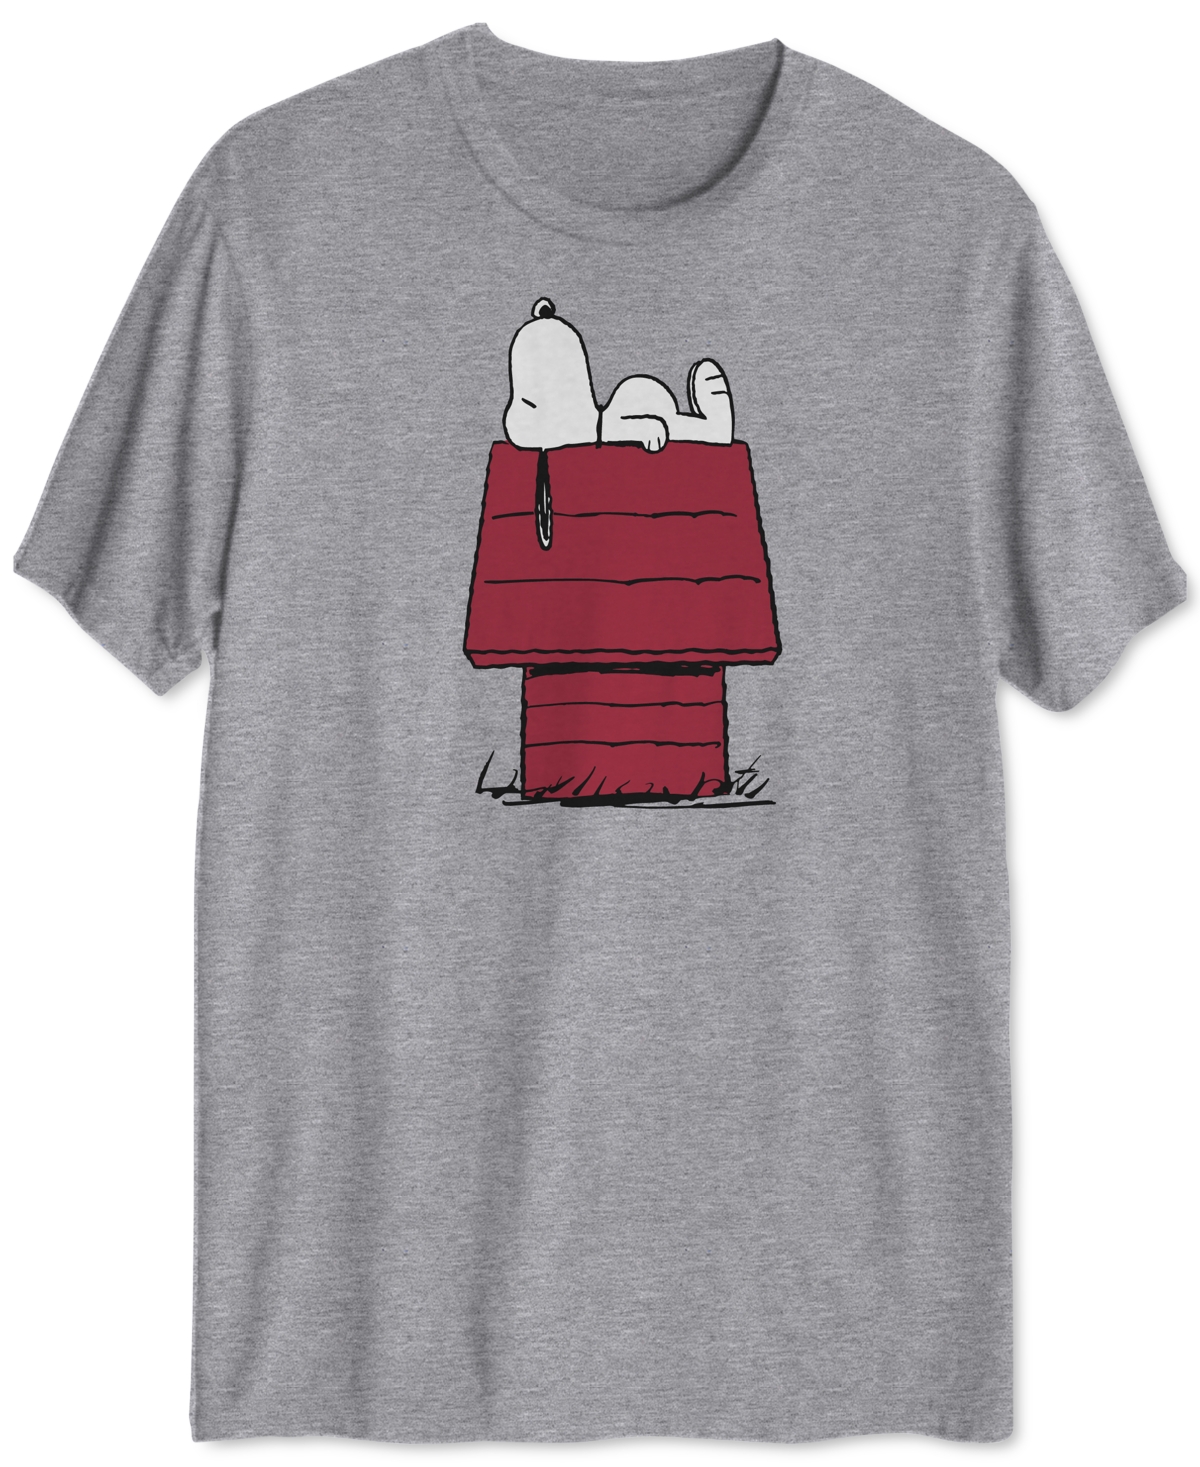 Snoopy Doghouse Men's Graphic T-Shirt - Grey